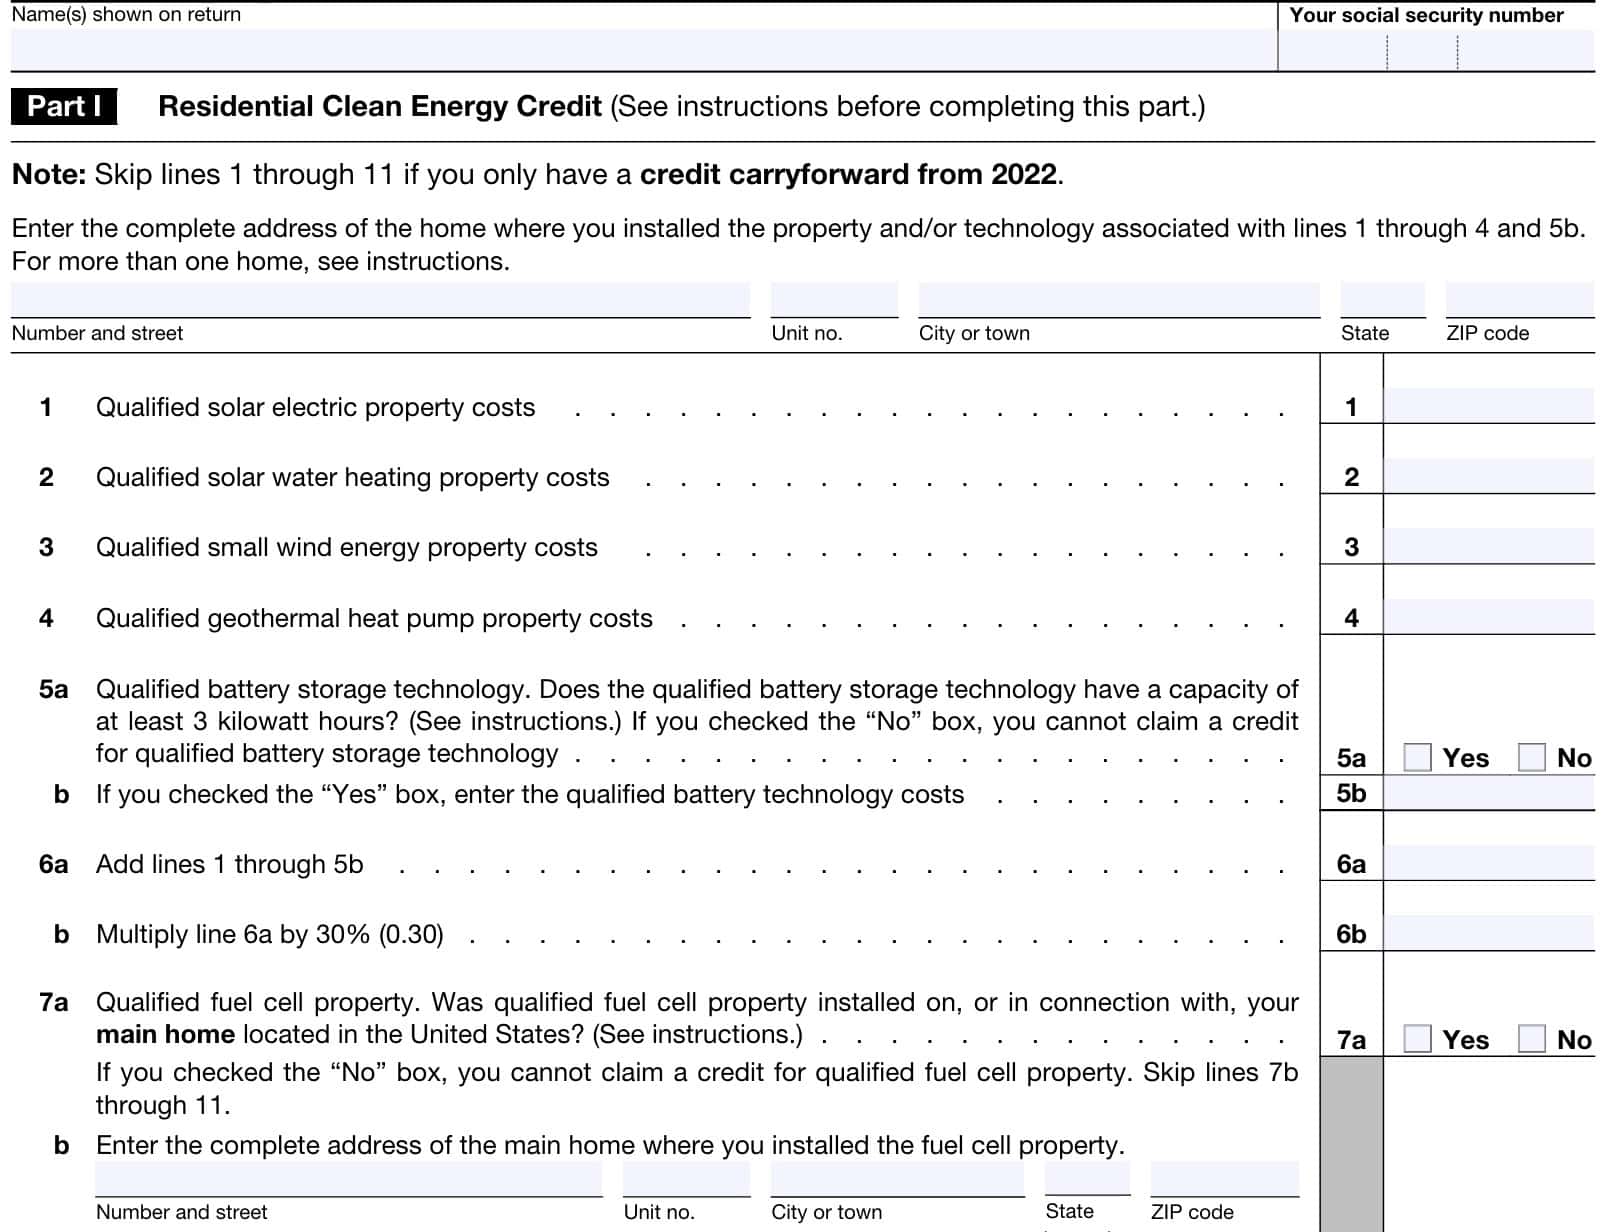 irs form 5695, part I: Residential clean energy credit lines 1 through 7